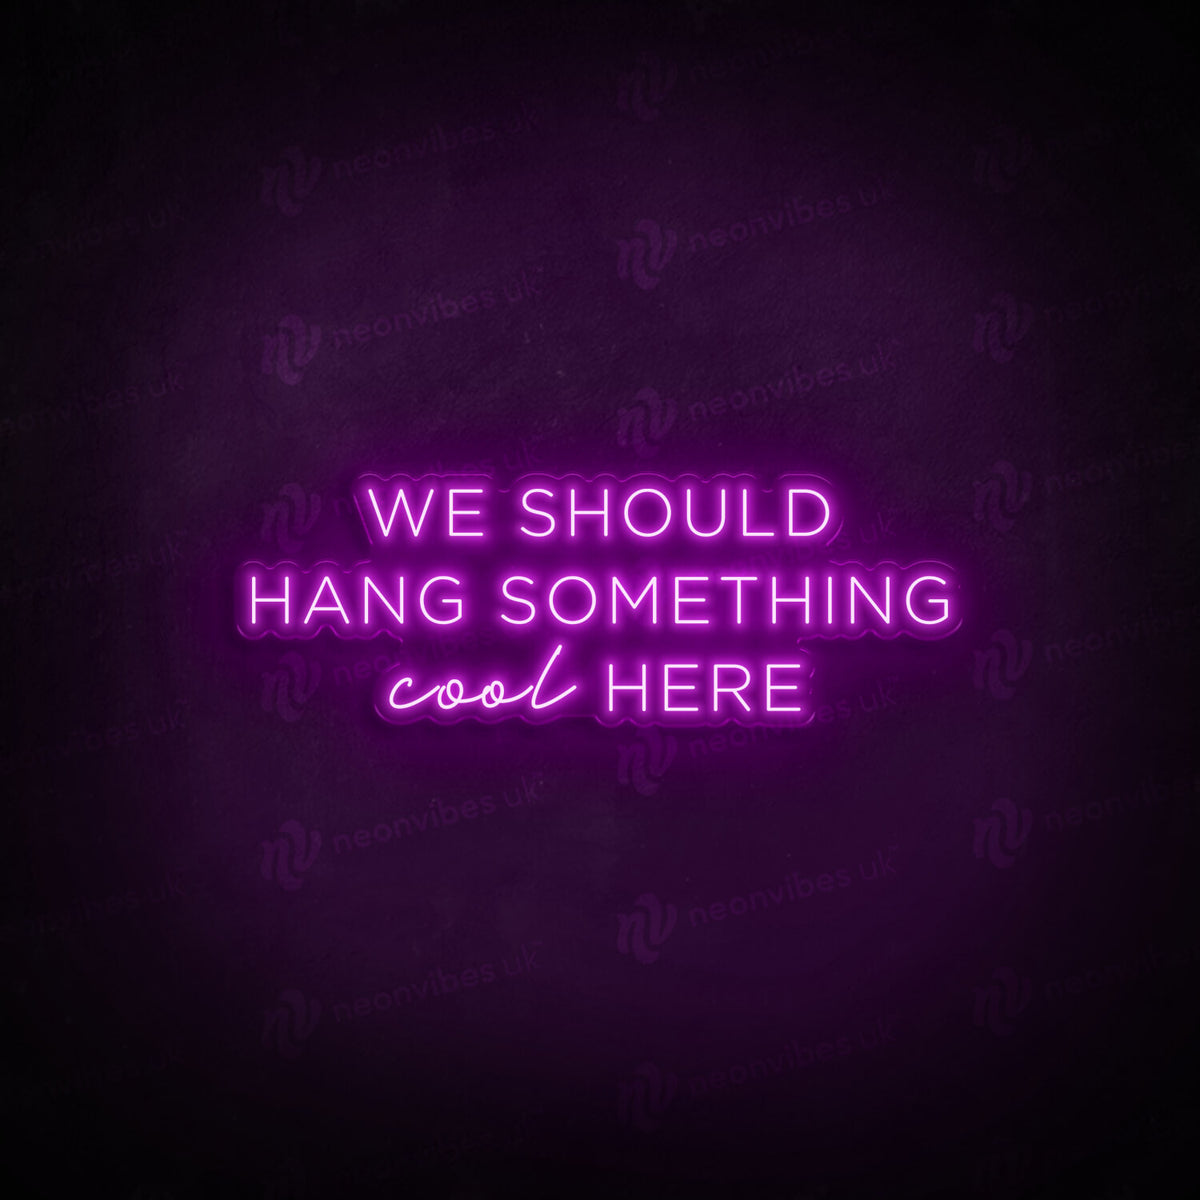 We should hang something cool here neon sign